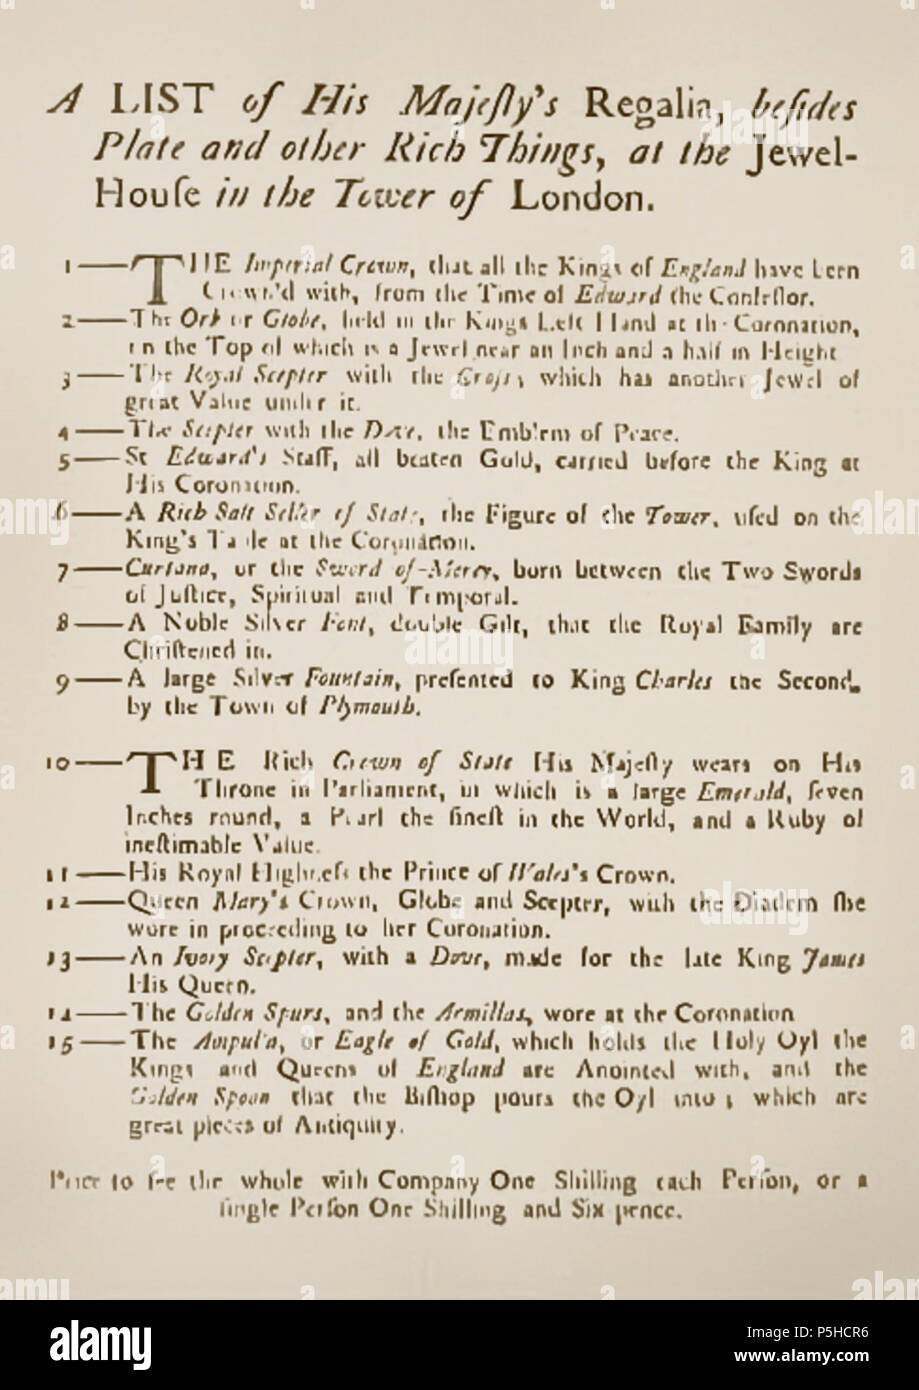 N/A. 'A List of His Majesty's Regalia, besides Plate and other Rich Things, at the Jewel House in the Tower of London' . published by the Tower of London, c. 1690. 44 A List of His Majesty's Regalia Stock Photo